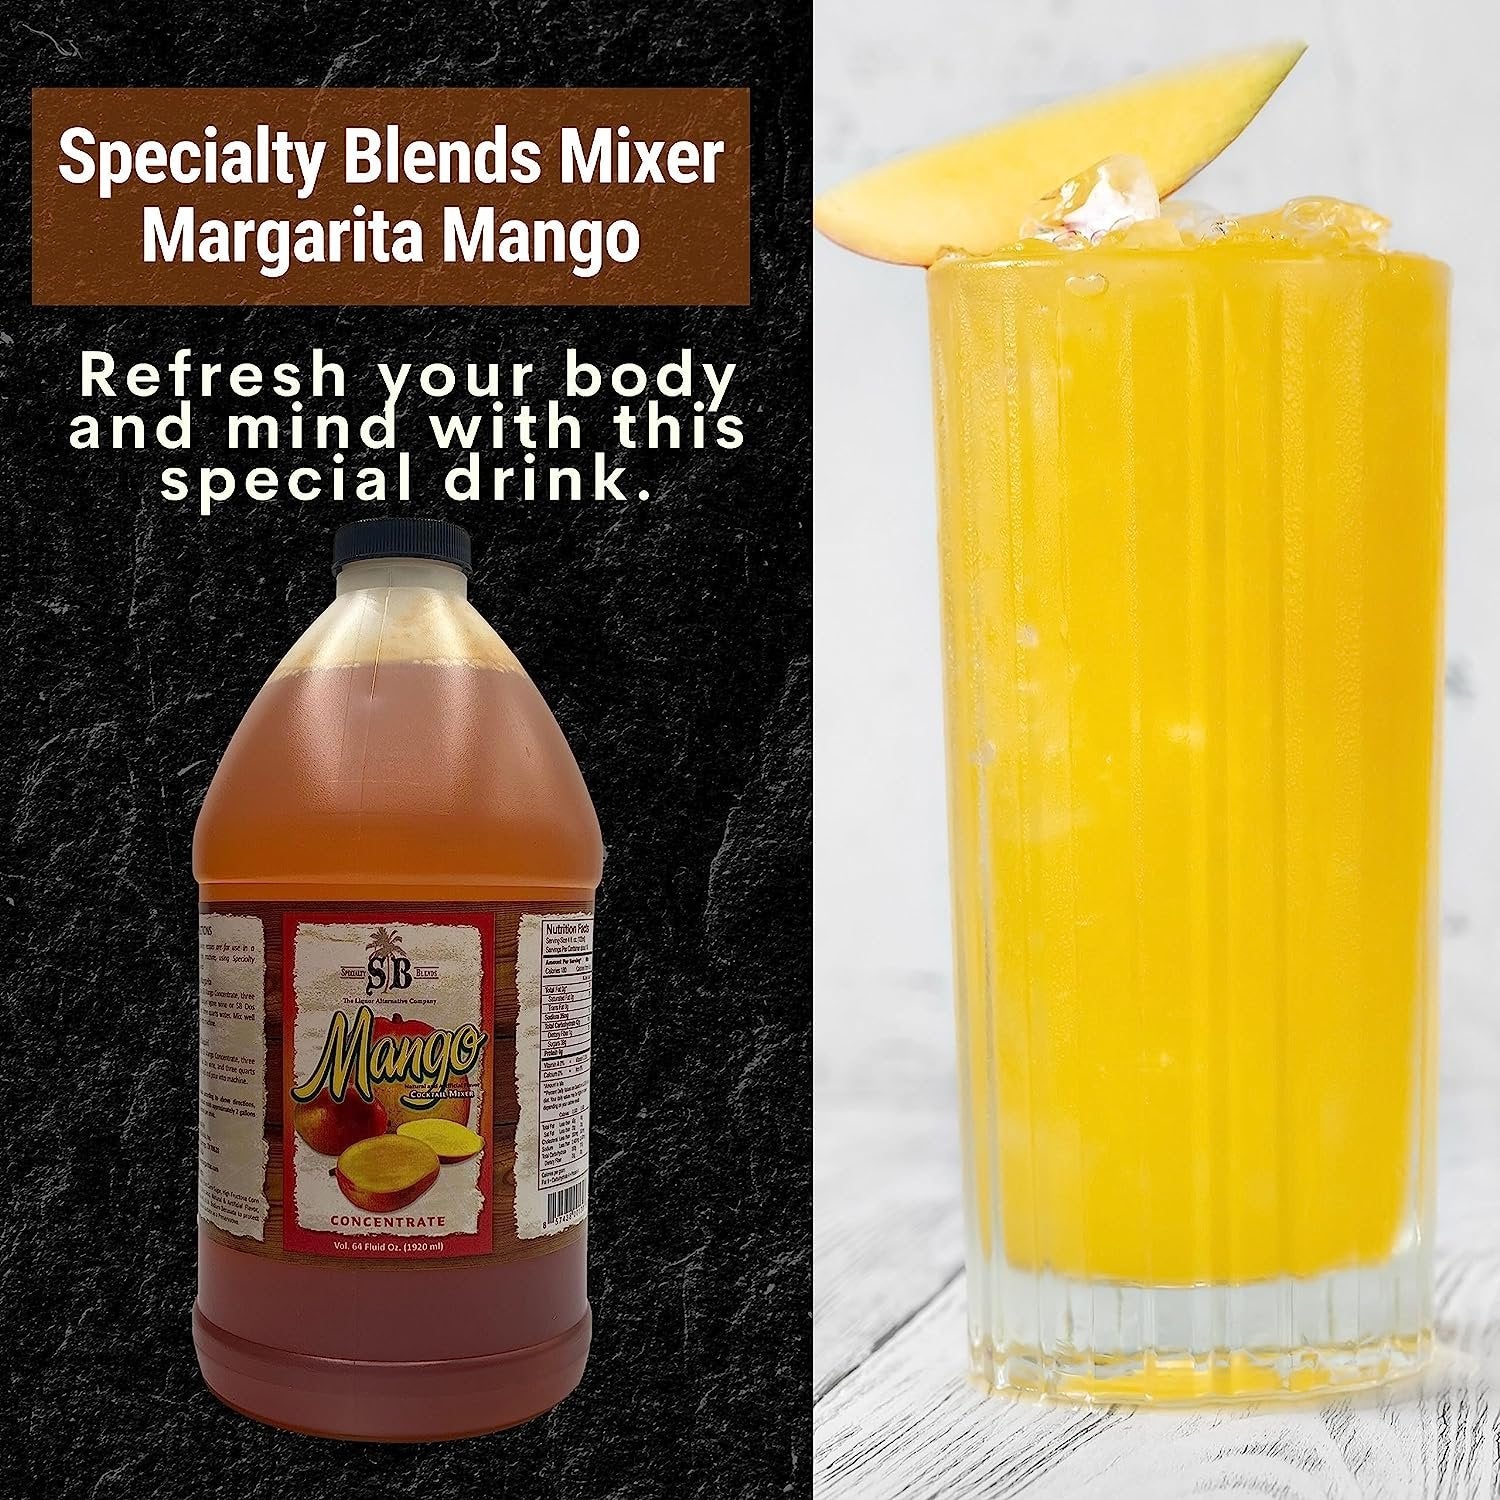 Specialty Blends Mango Syrup For Drinks - Cocktail Syrup Margarita Mix Concentrate, Made with Organic Mango 1/2 Gallon Drink Mix (Pack of 1) - with Bonus Worldwide Nutrition Multi Purpose Key Chain